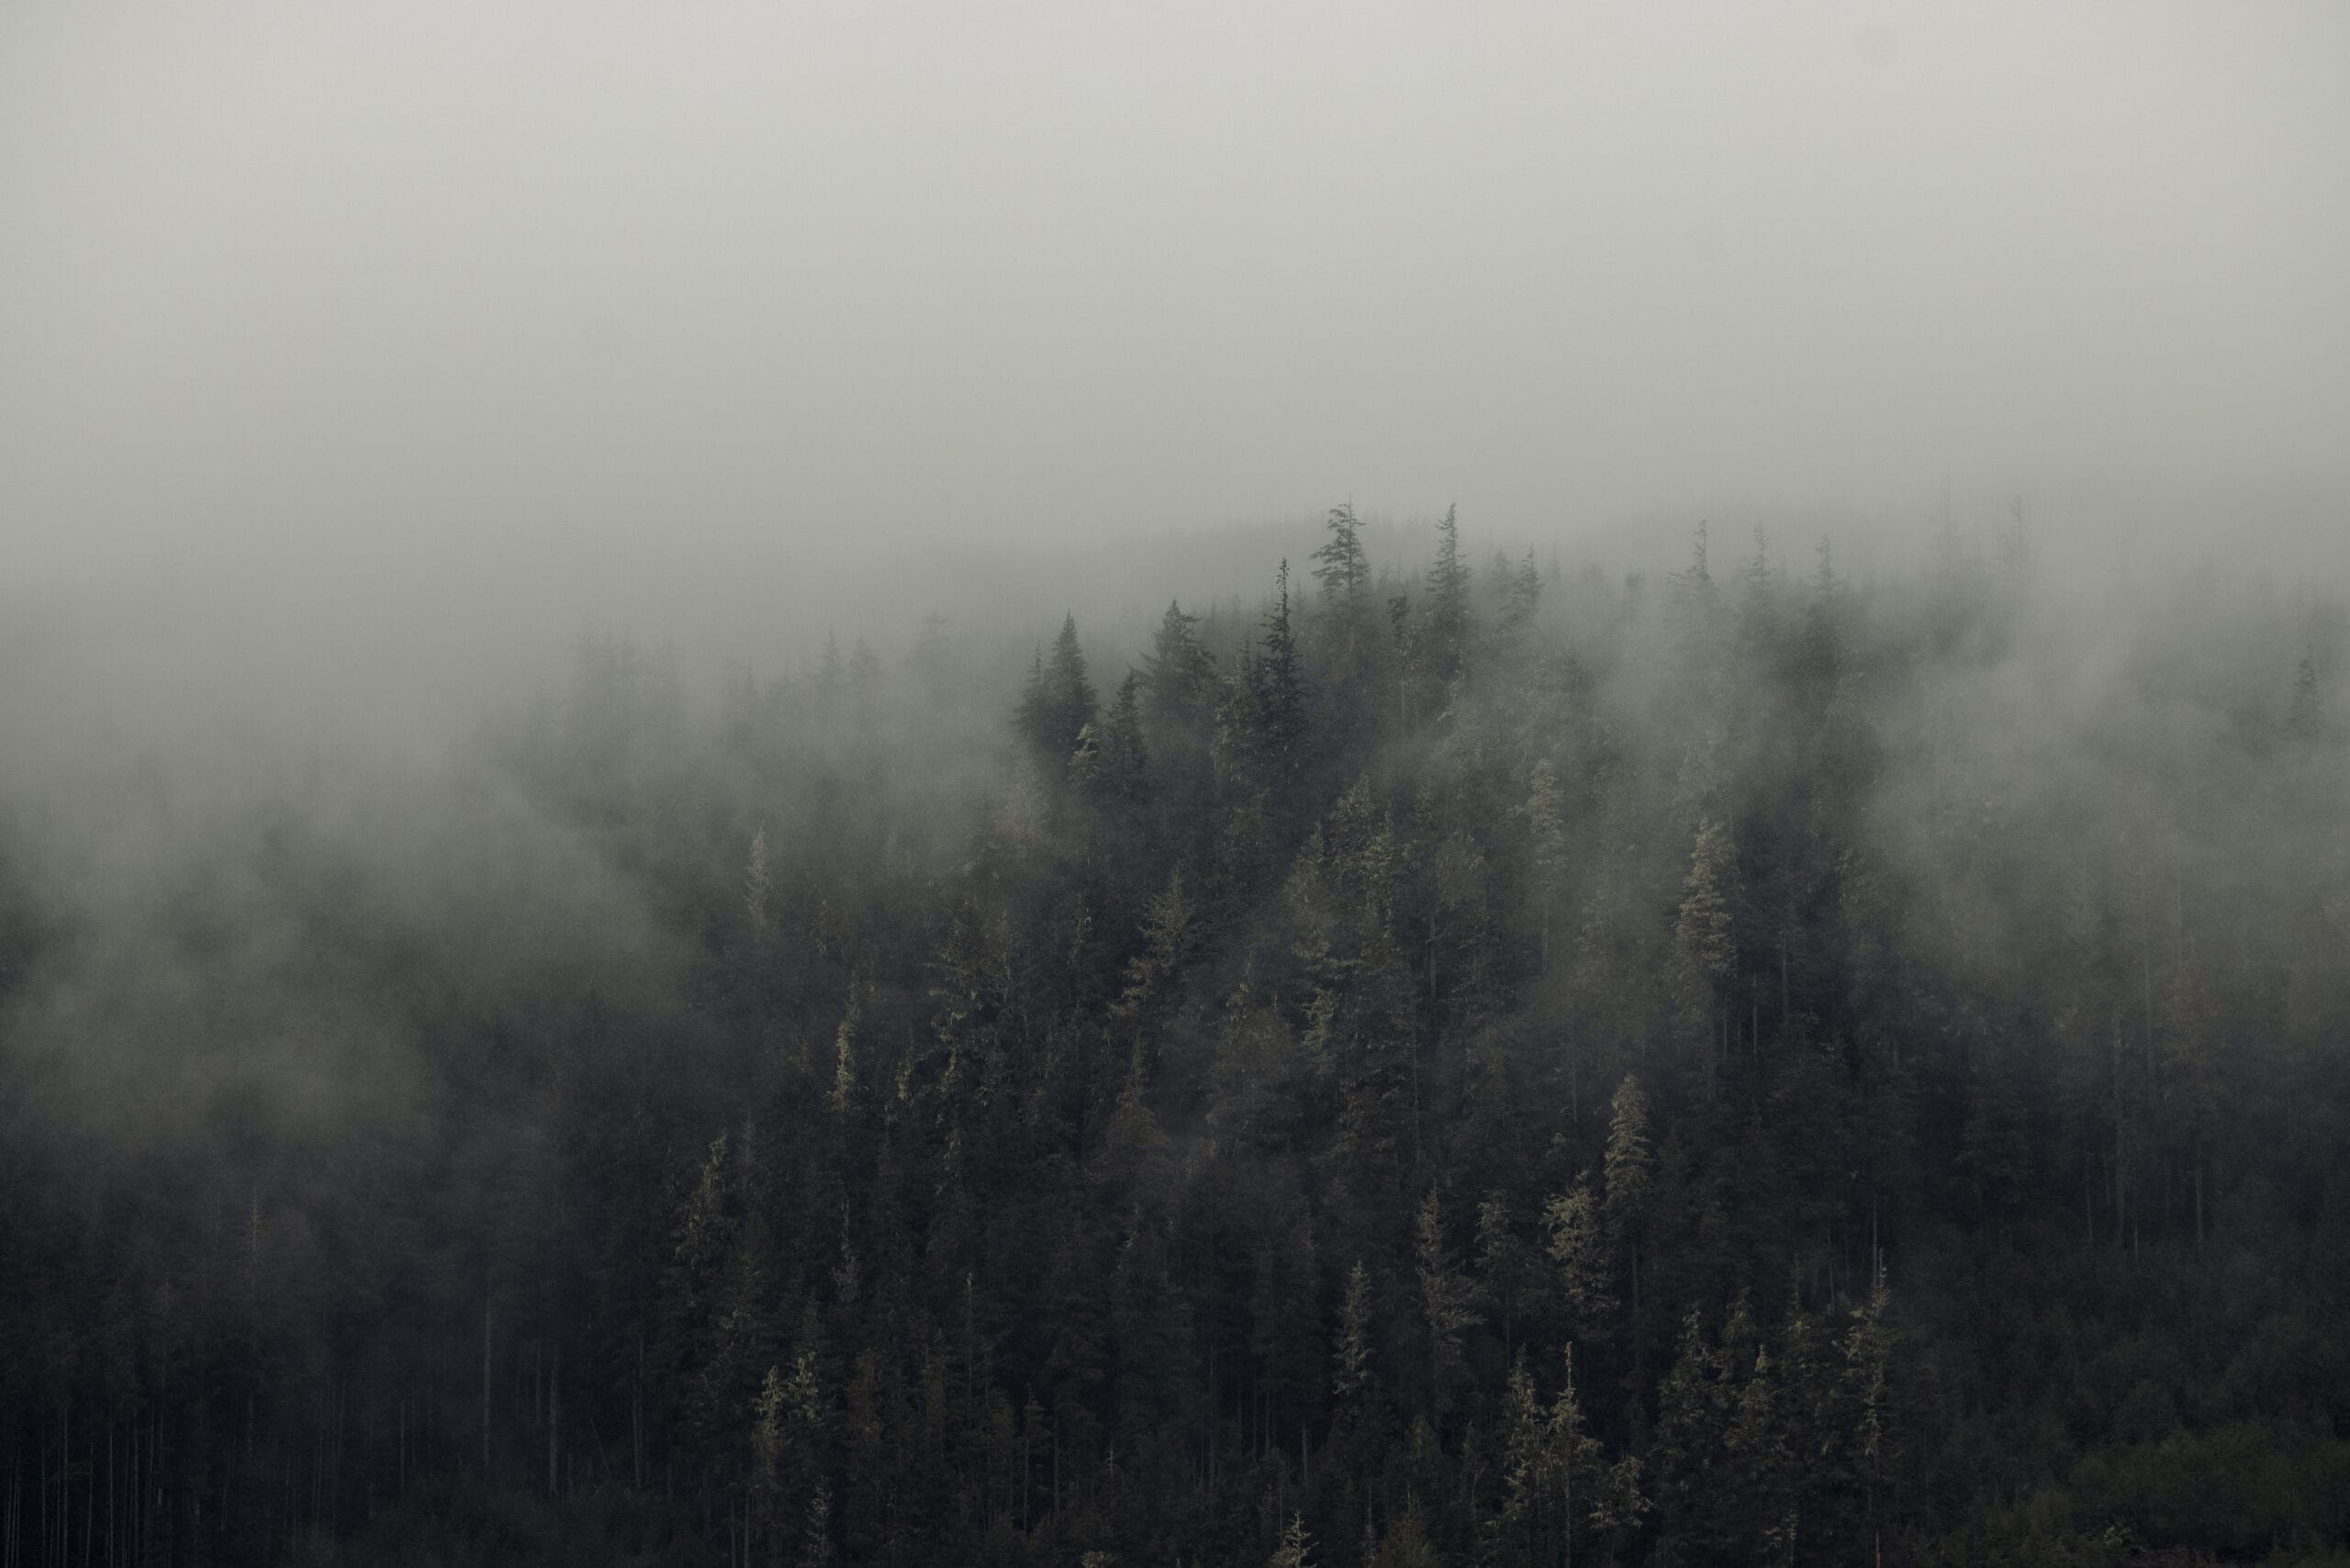 Mist hangs over trees in the southern range of the Great Bear Rainforest. Photo: Taylor Roades / The Narwhal.